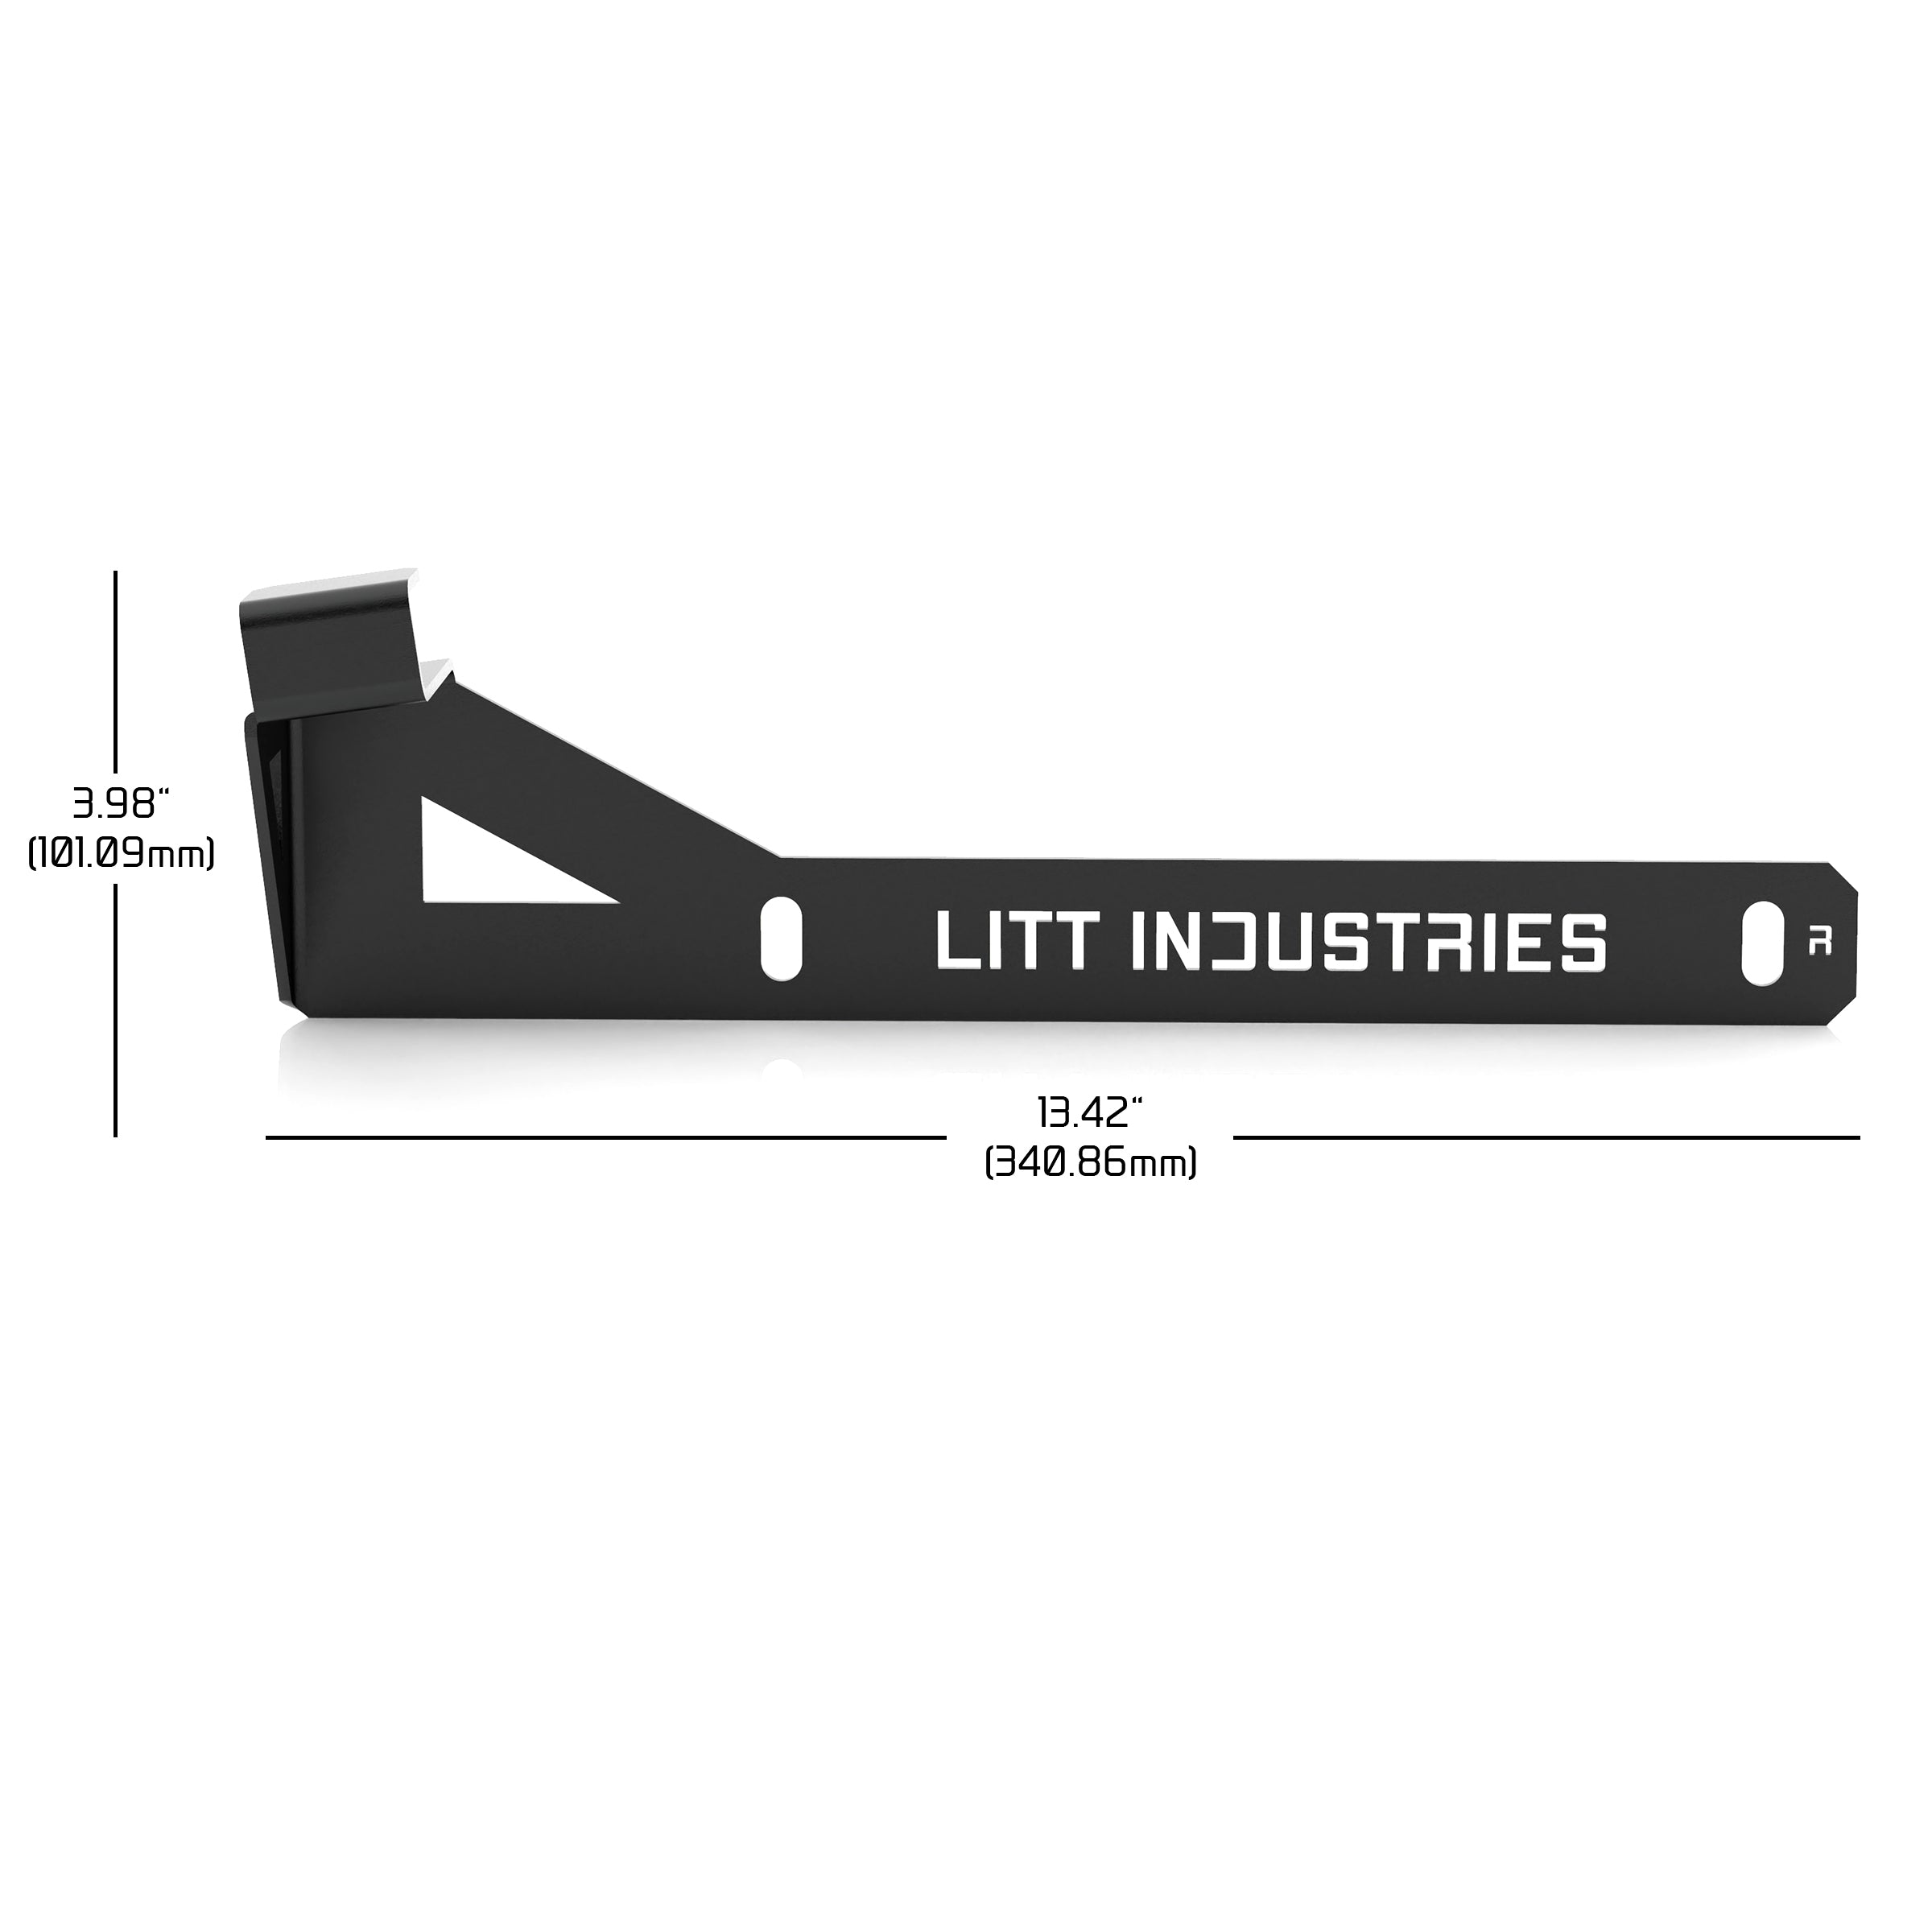 litt industries yeti 35 qt tundra gusseted cooler mounts dimensions for polaris rzr pro xp pro r or turbo r models with or without anchors